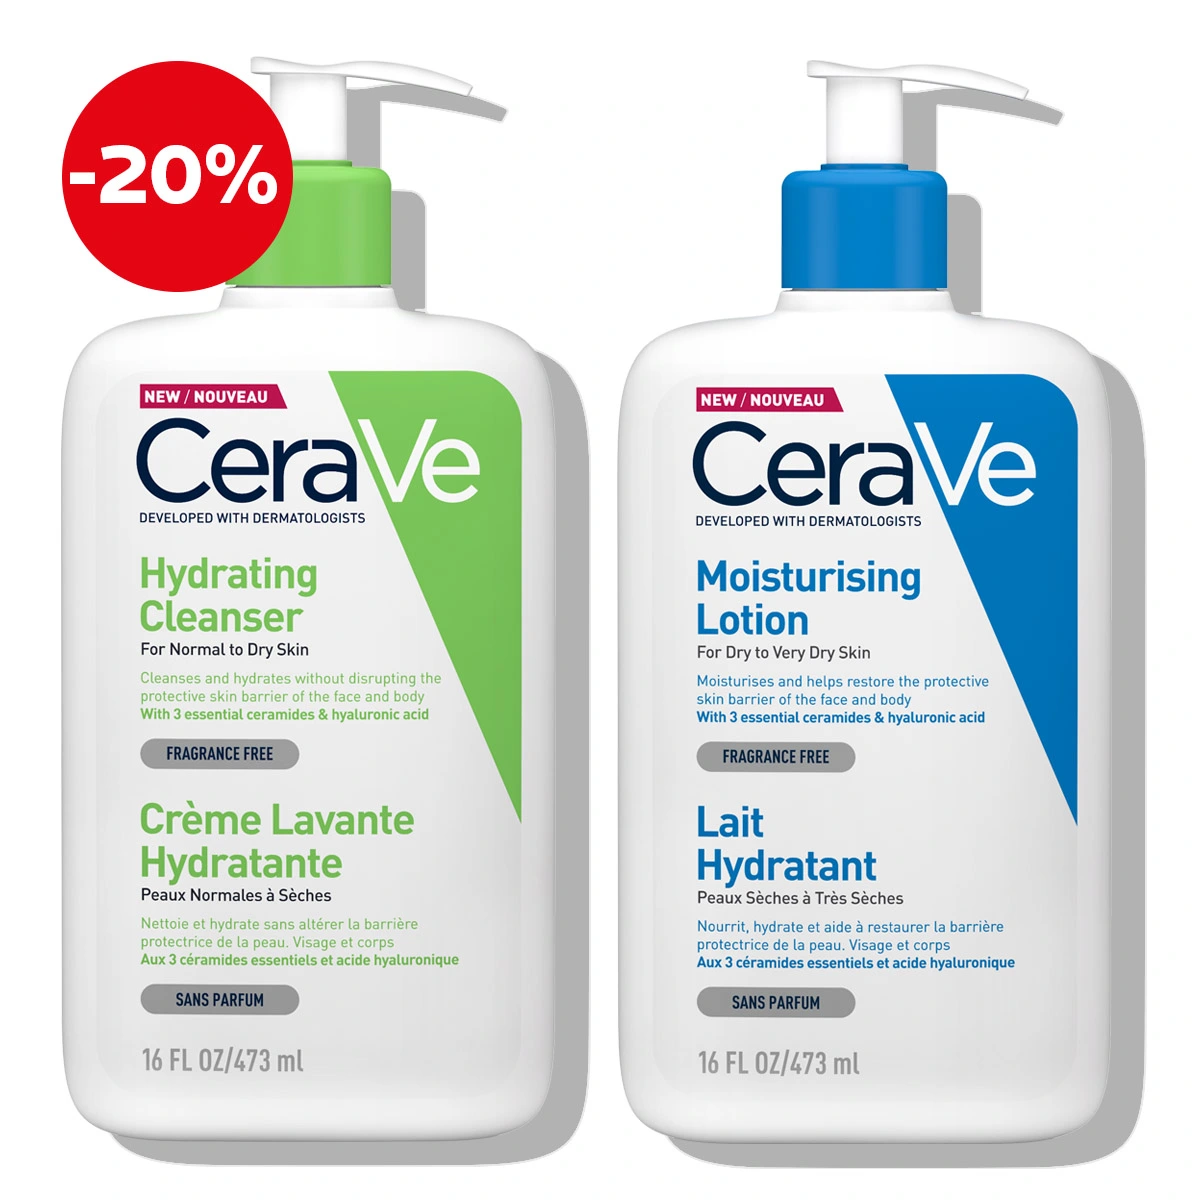 CeraVe-Daily-Face-_-Body-Protocol-For-Dry-Skin-_Cleansing-And-Care_-_2_